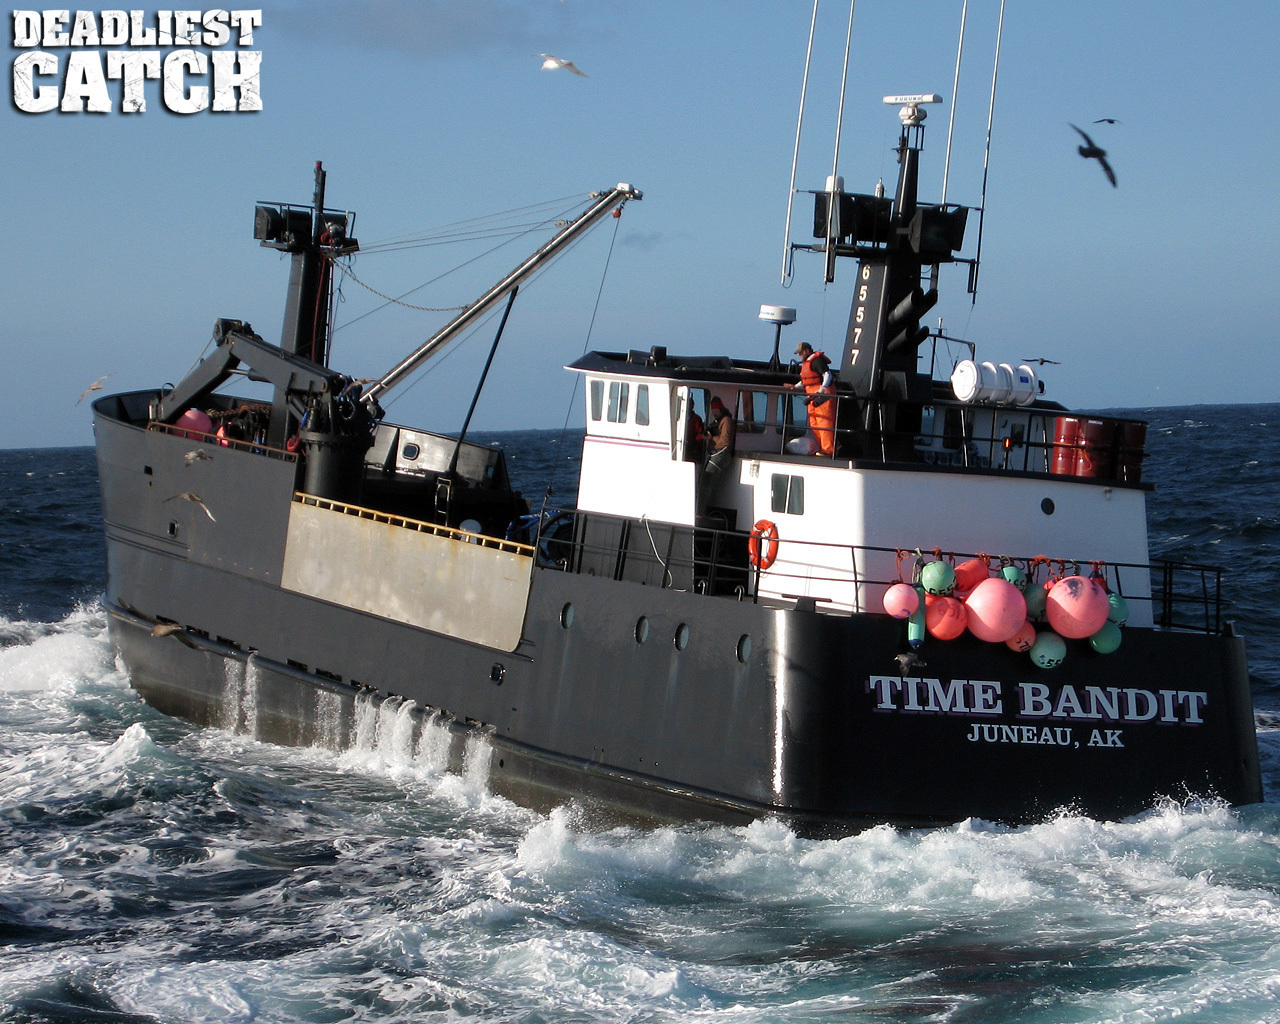 Beam Communications: Time Bandit in the Deadliest Catch is 